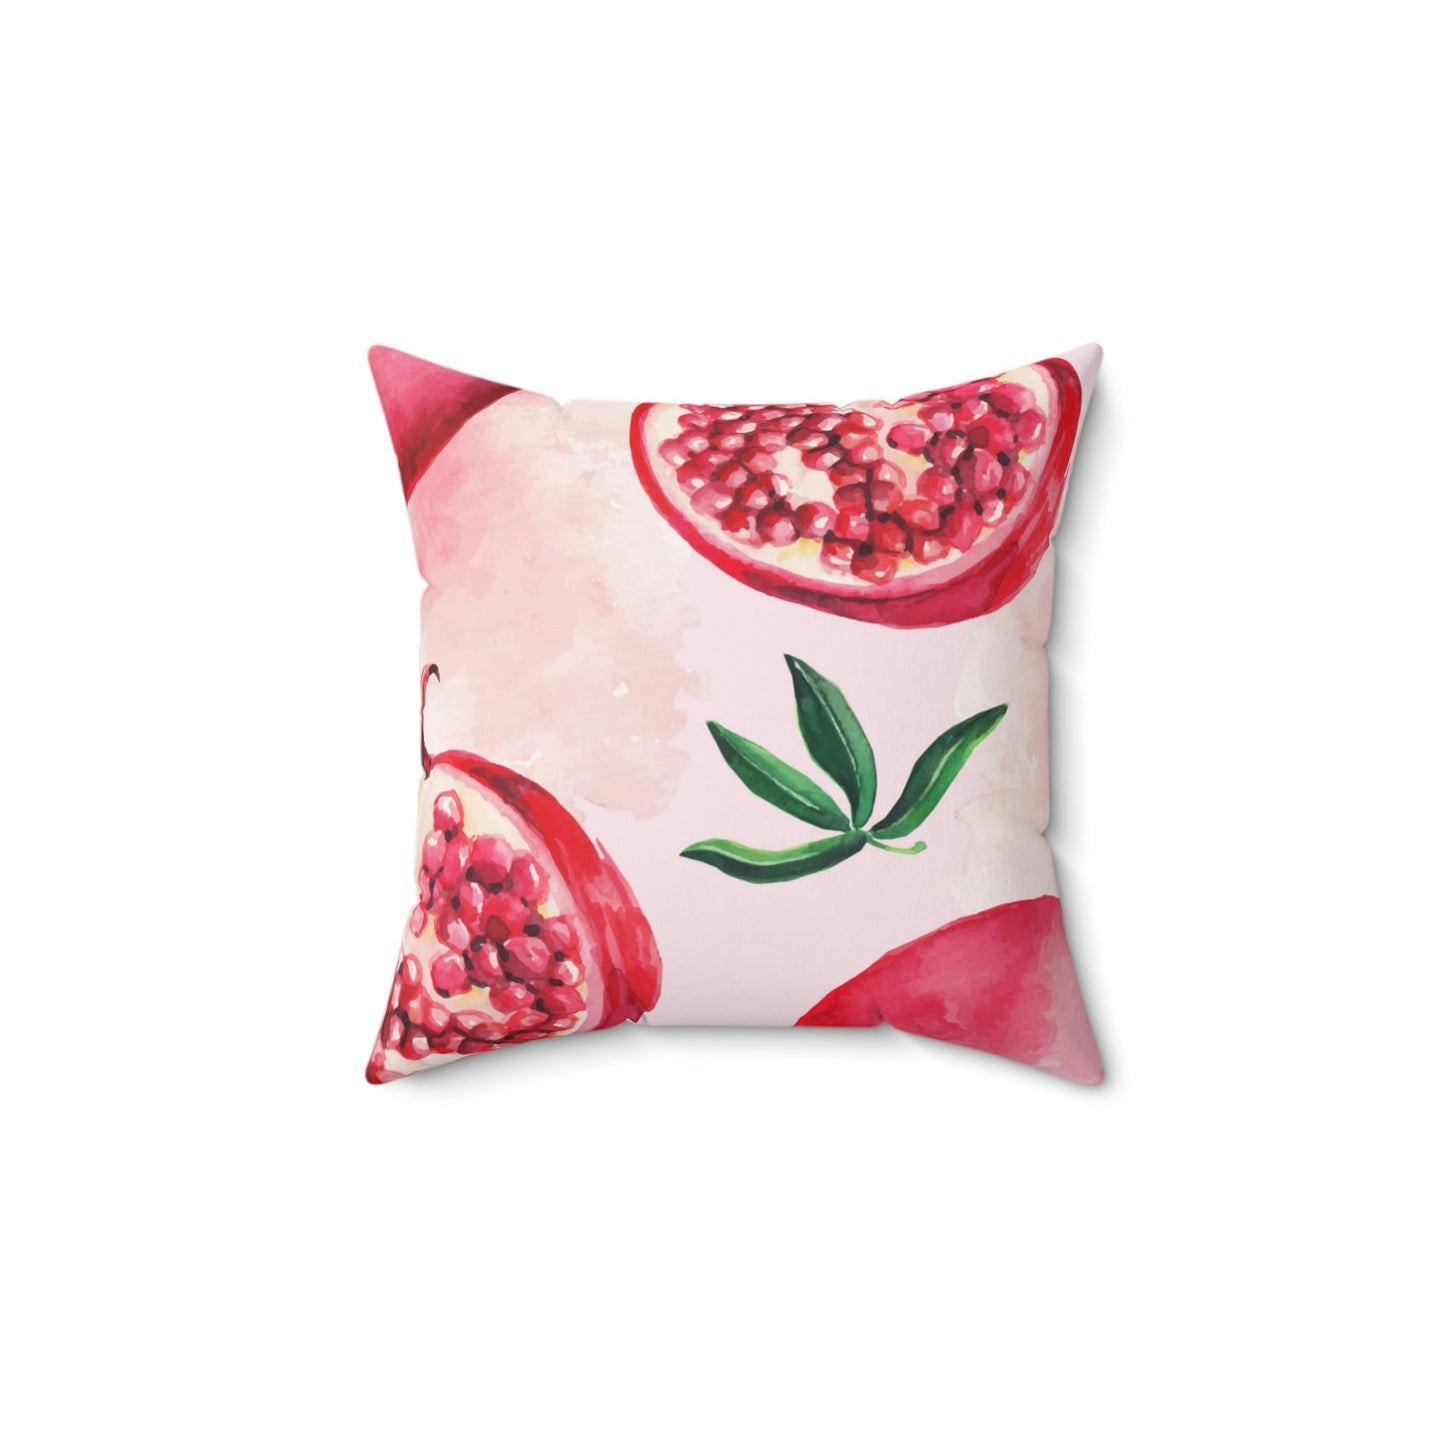 Pomegranate Square Pillow Home Decor Pink Sweetheart